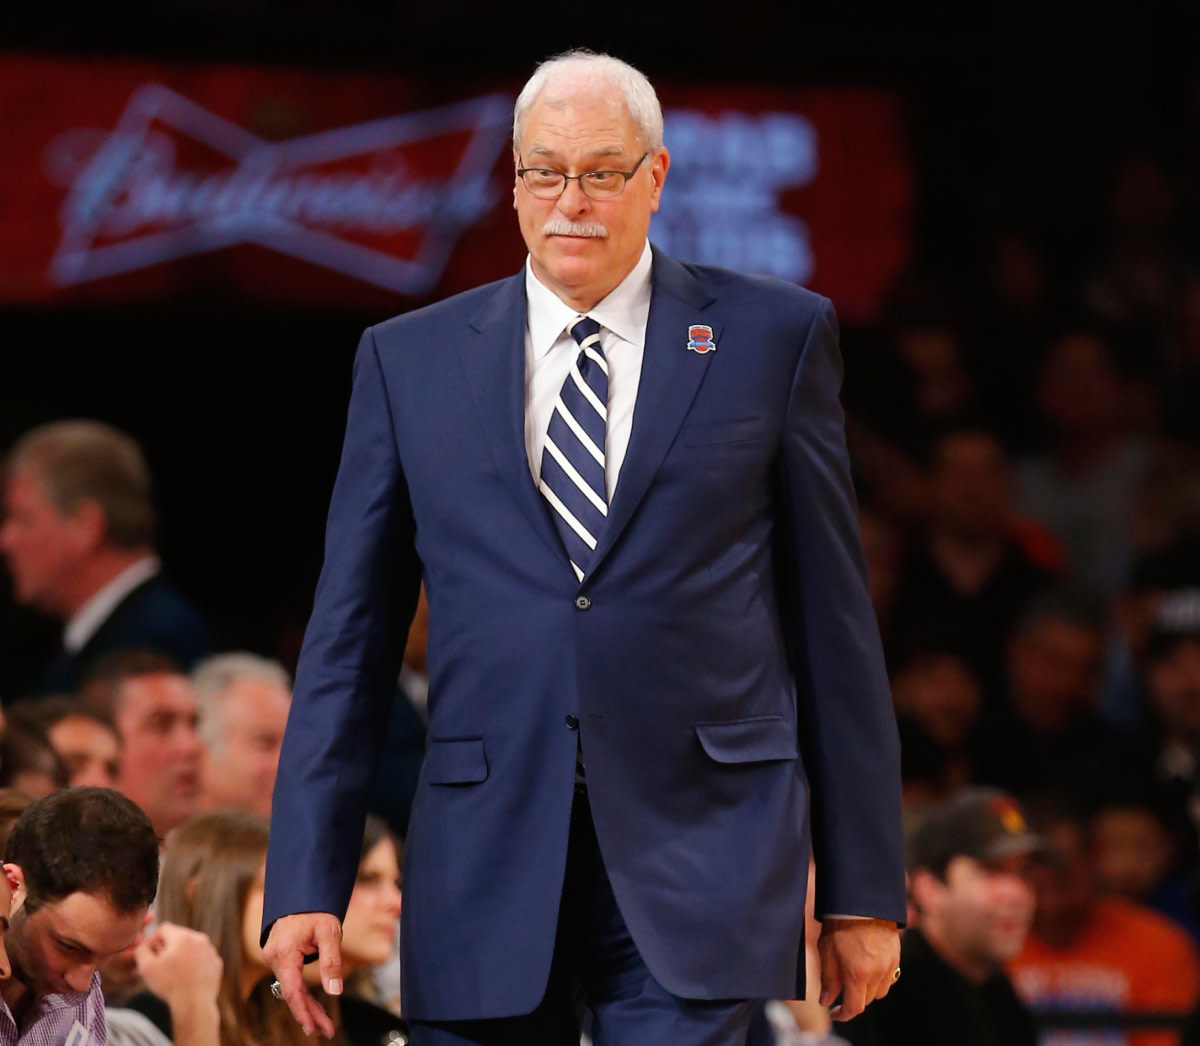 Phil Jackson Once Recommended That The NBA Should Add A 4-Point Line And 30-Second Shot Clock: "It Wouldn't Be Long Before Players Will Get Reasonably Comfortable Shooting From Out There."